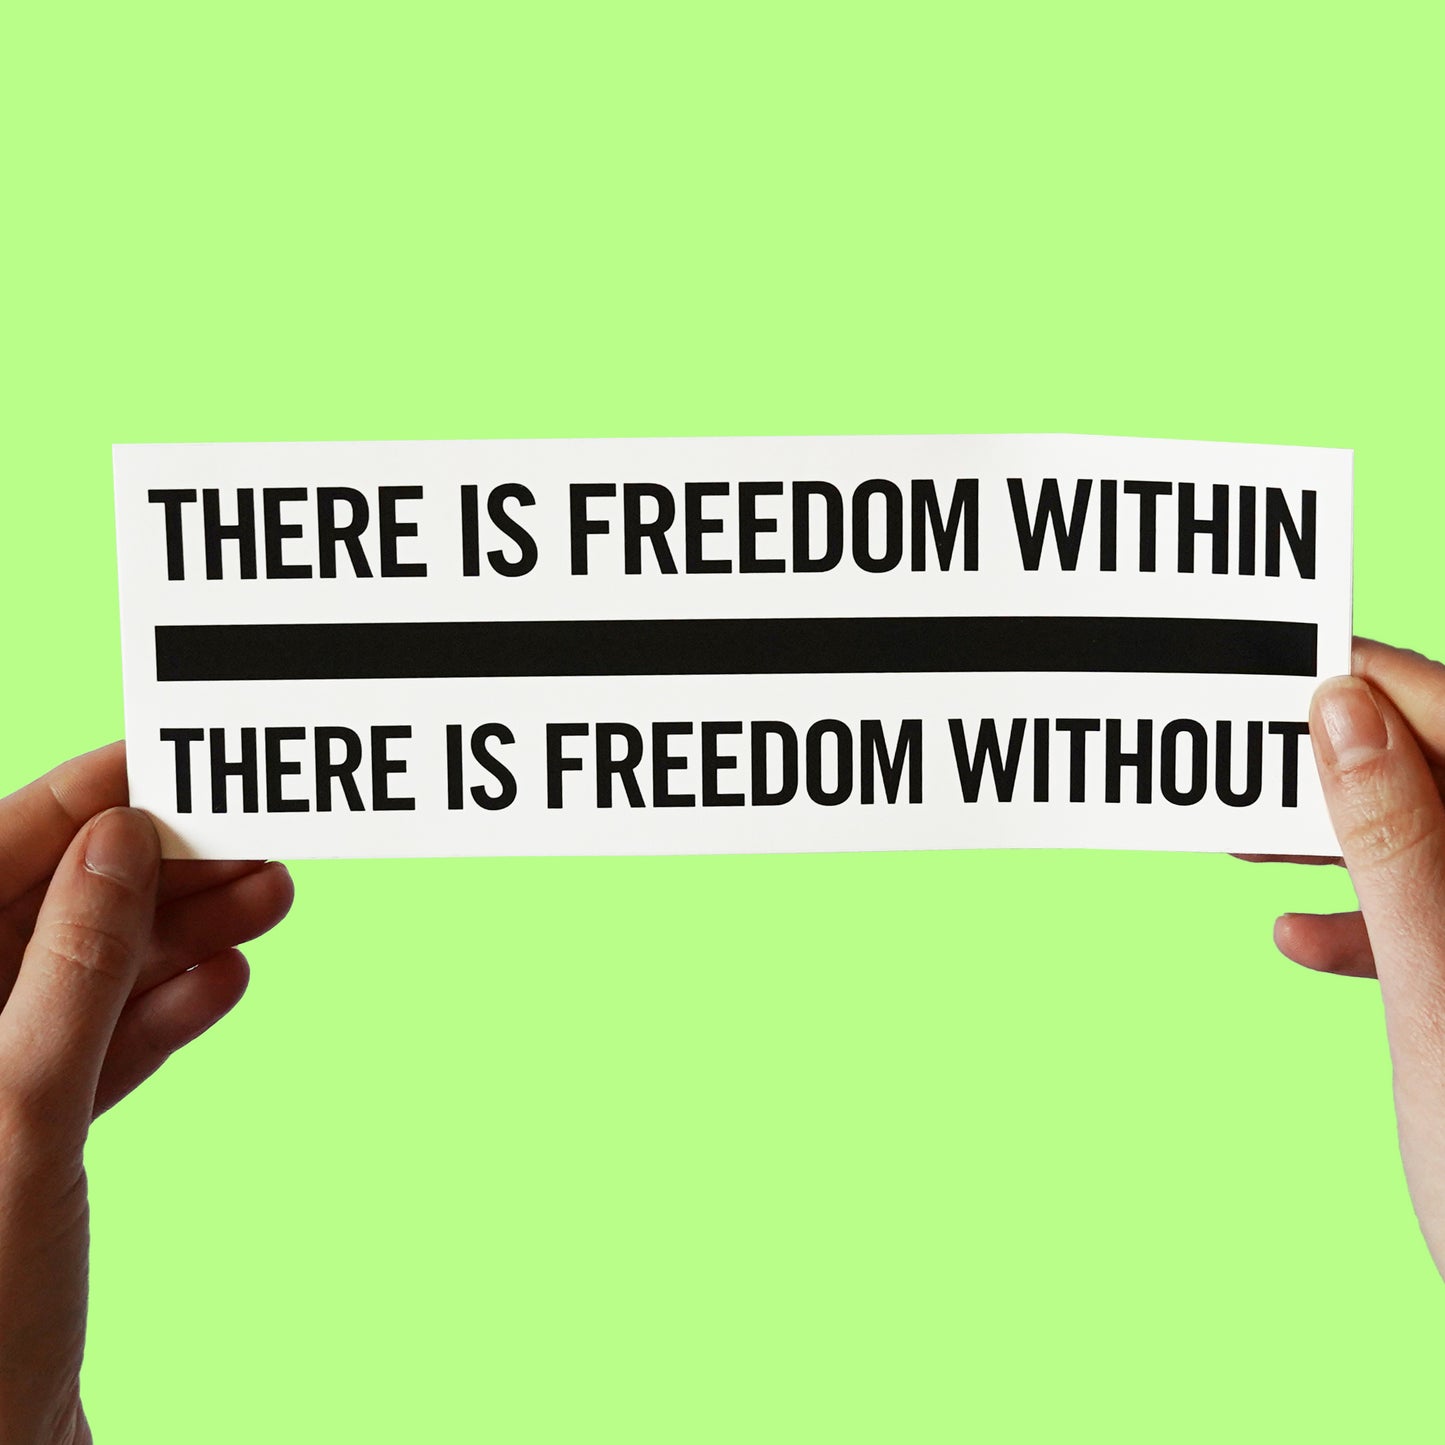 Crowded House 'Don't Dream It's Over' Lyric Sticker  There is freedom within, there is freedom without